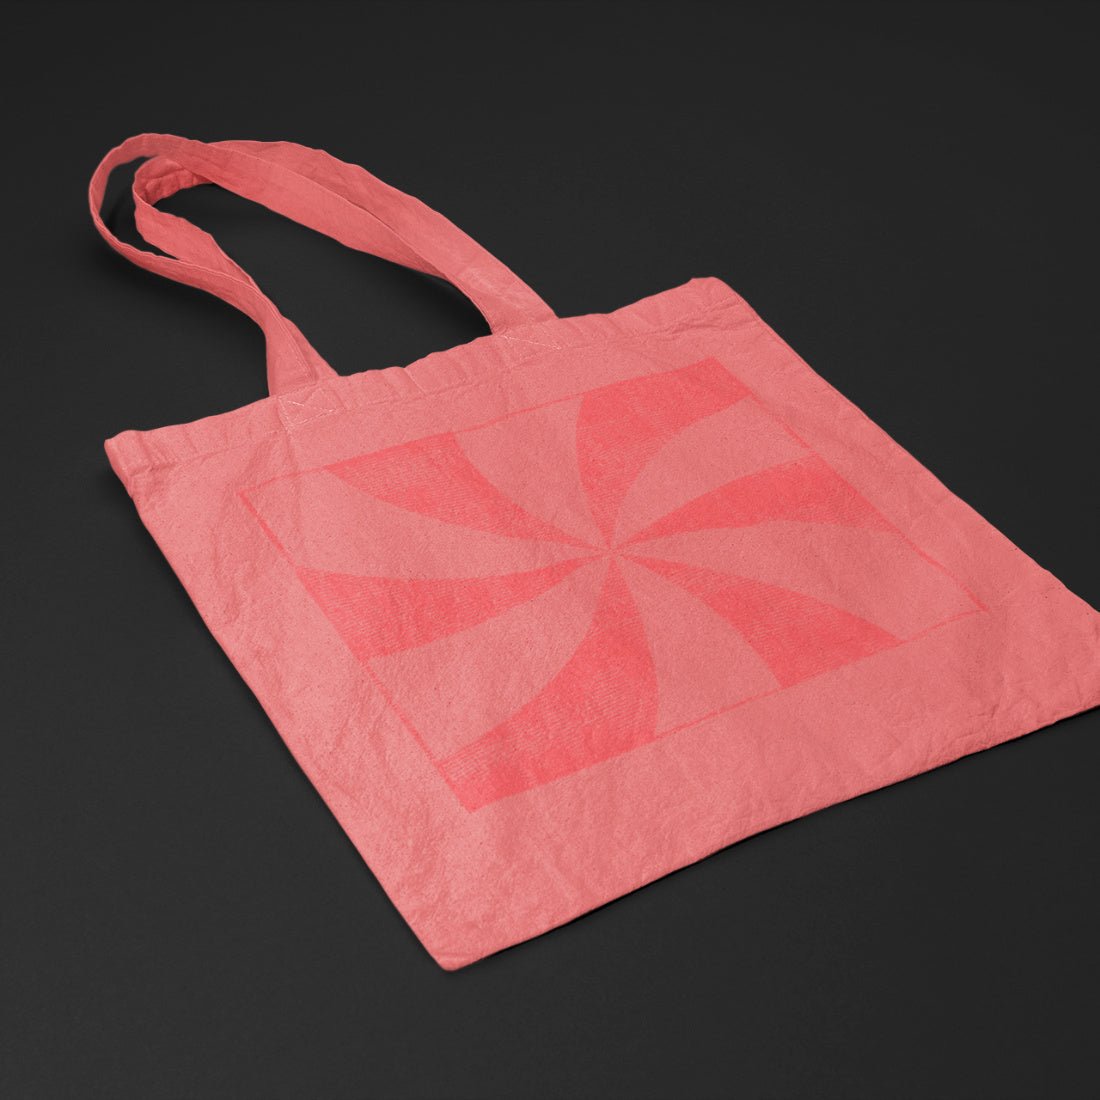 Promotional Gloss Laminated Designer Tote Bags